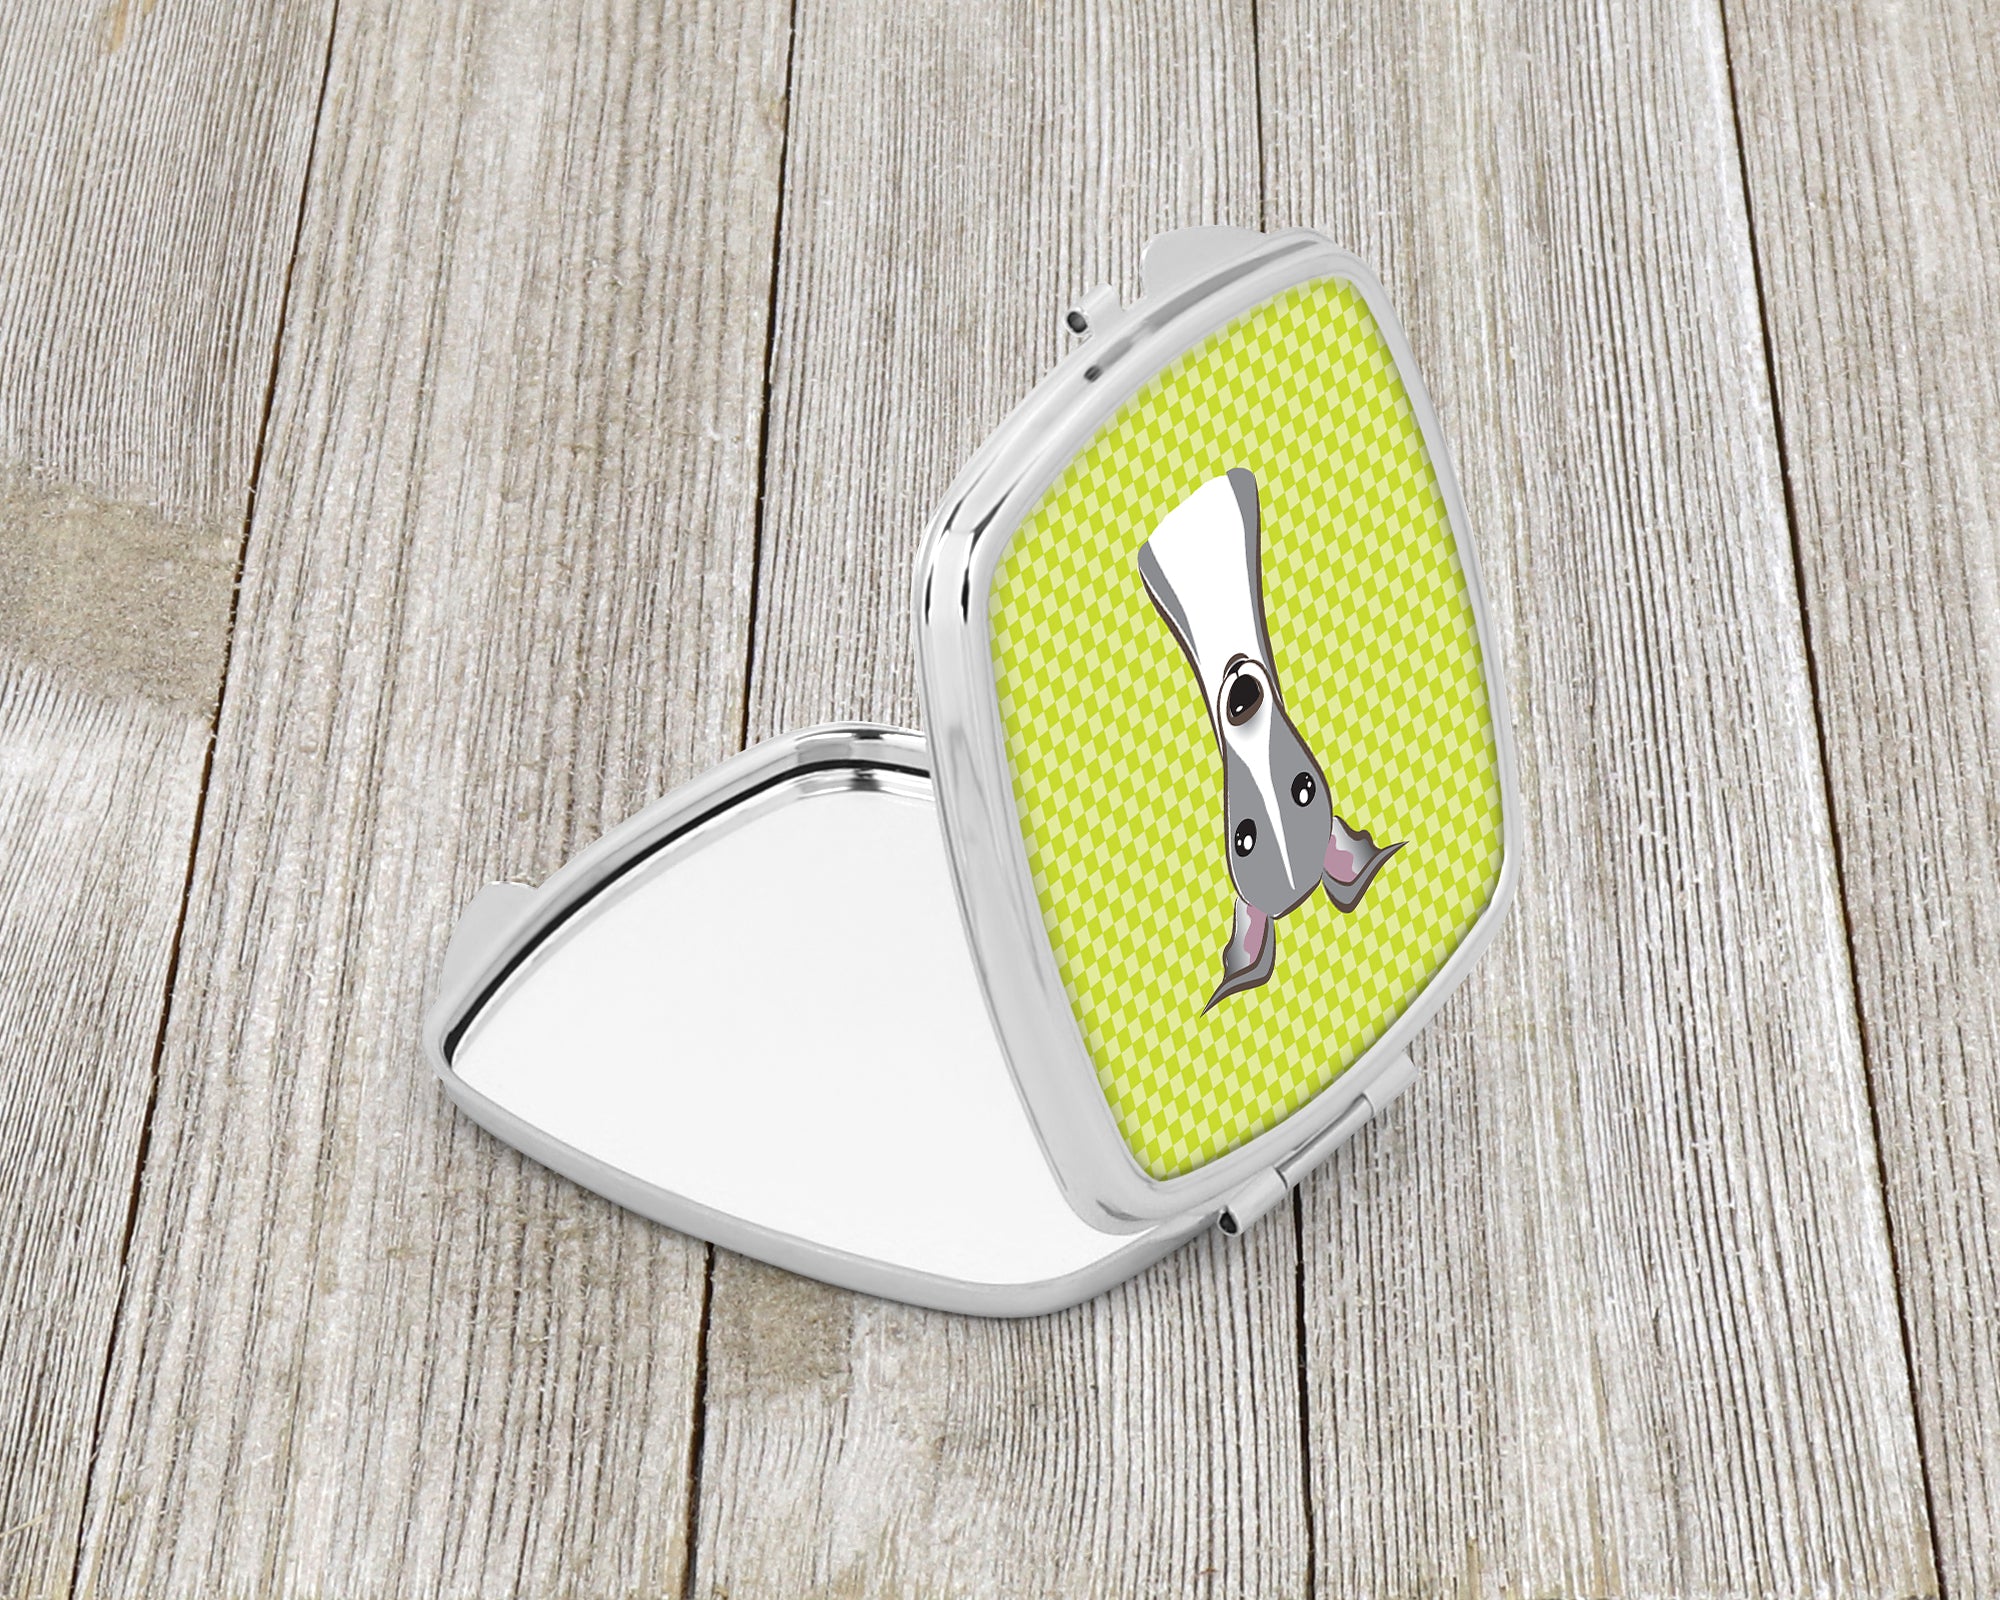 Checkerboard Lime Green Italian Greyhound Compact Mirror BB1298SCM  the-store.com.